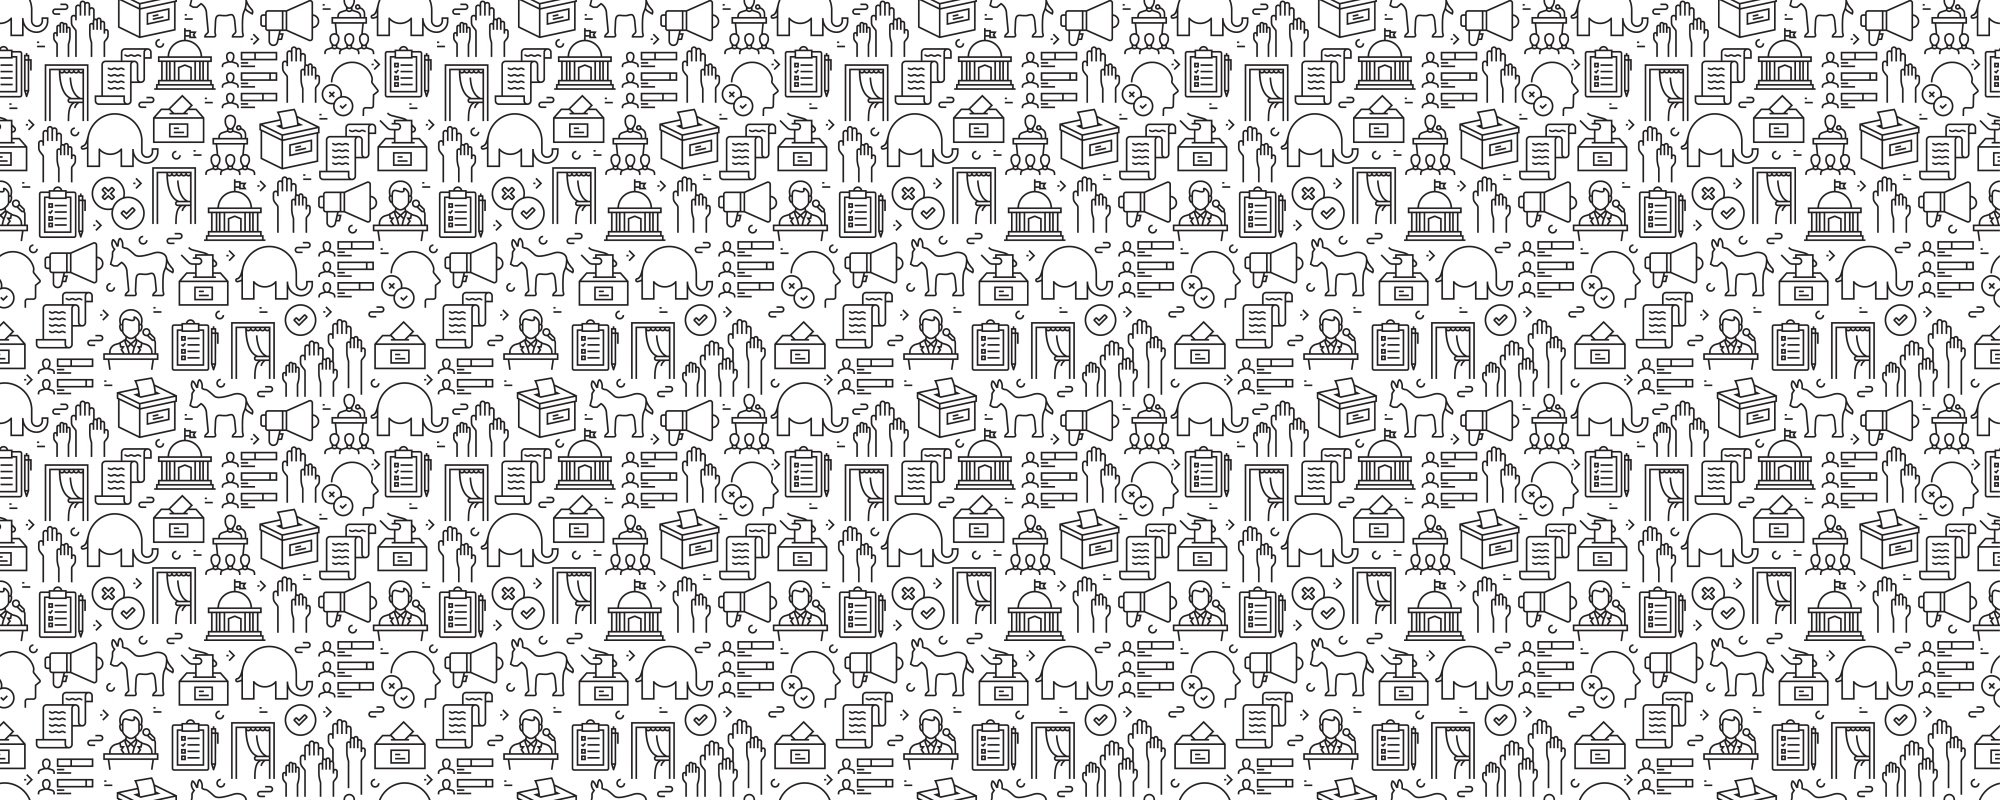 Election Related Seamless Pattern and Background with Line Icons